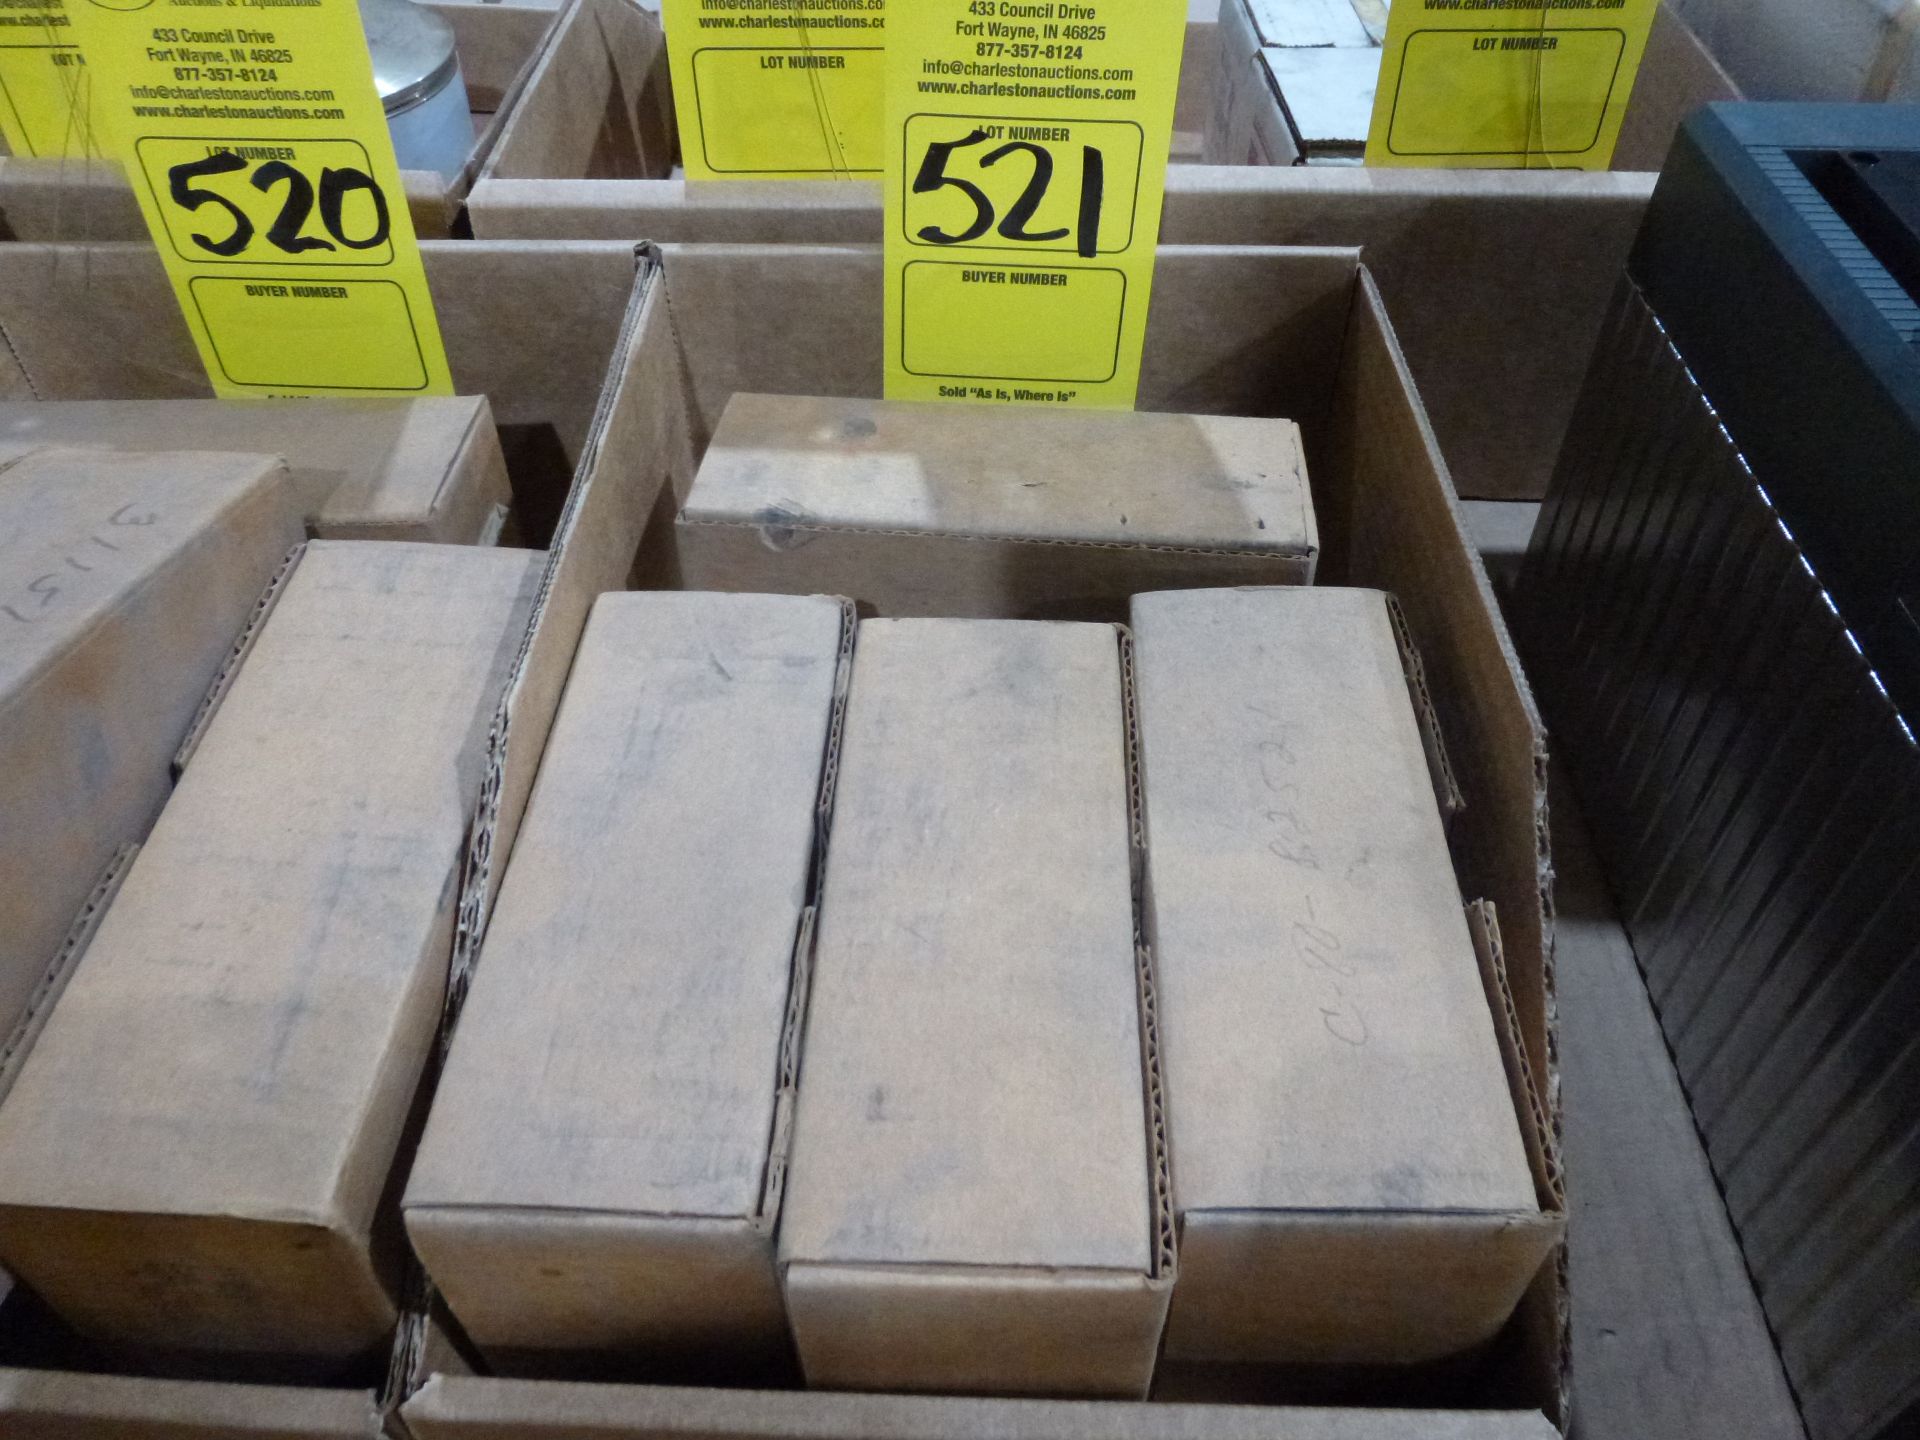 Qty 4 Heinemann Catalog number 2X0411, new in boxes, as always with Brolyn LLC auctions, all lots